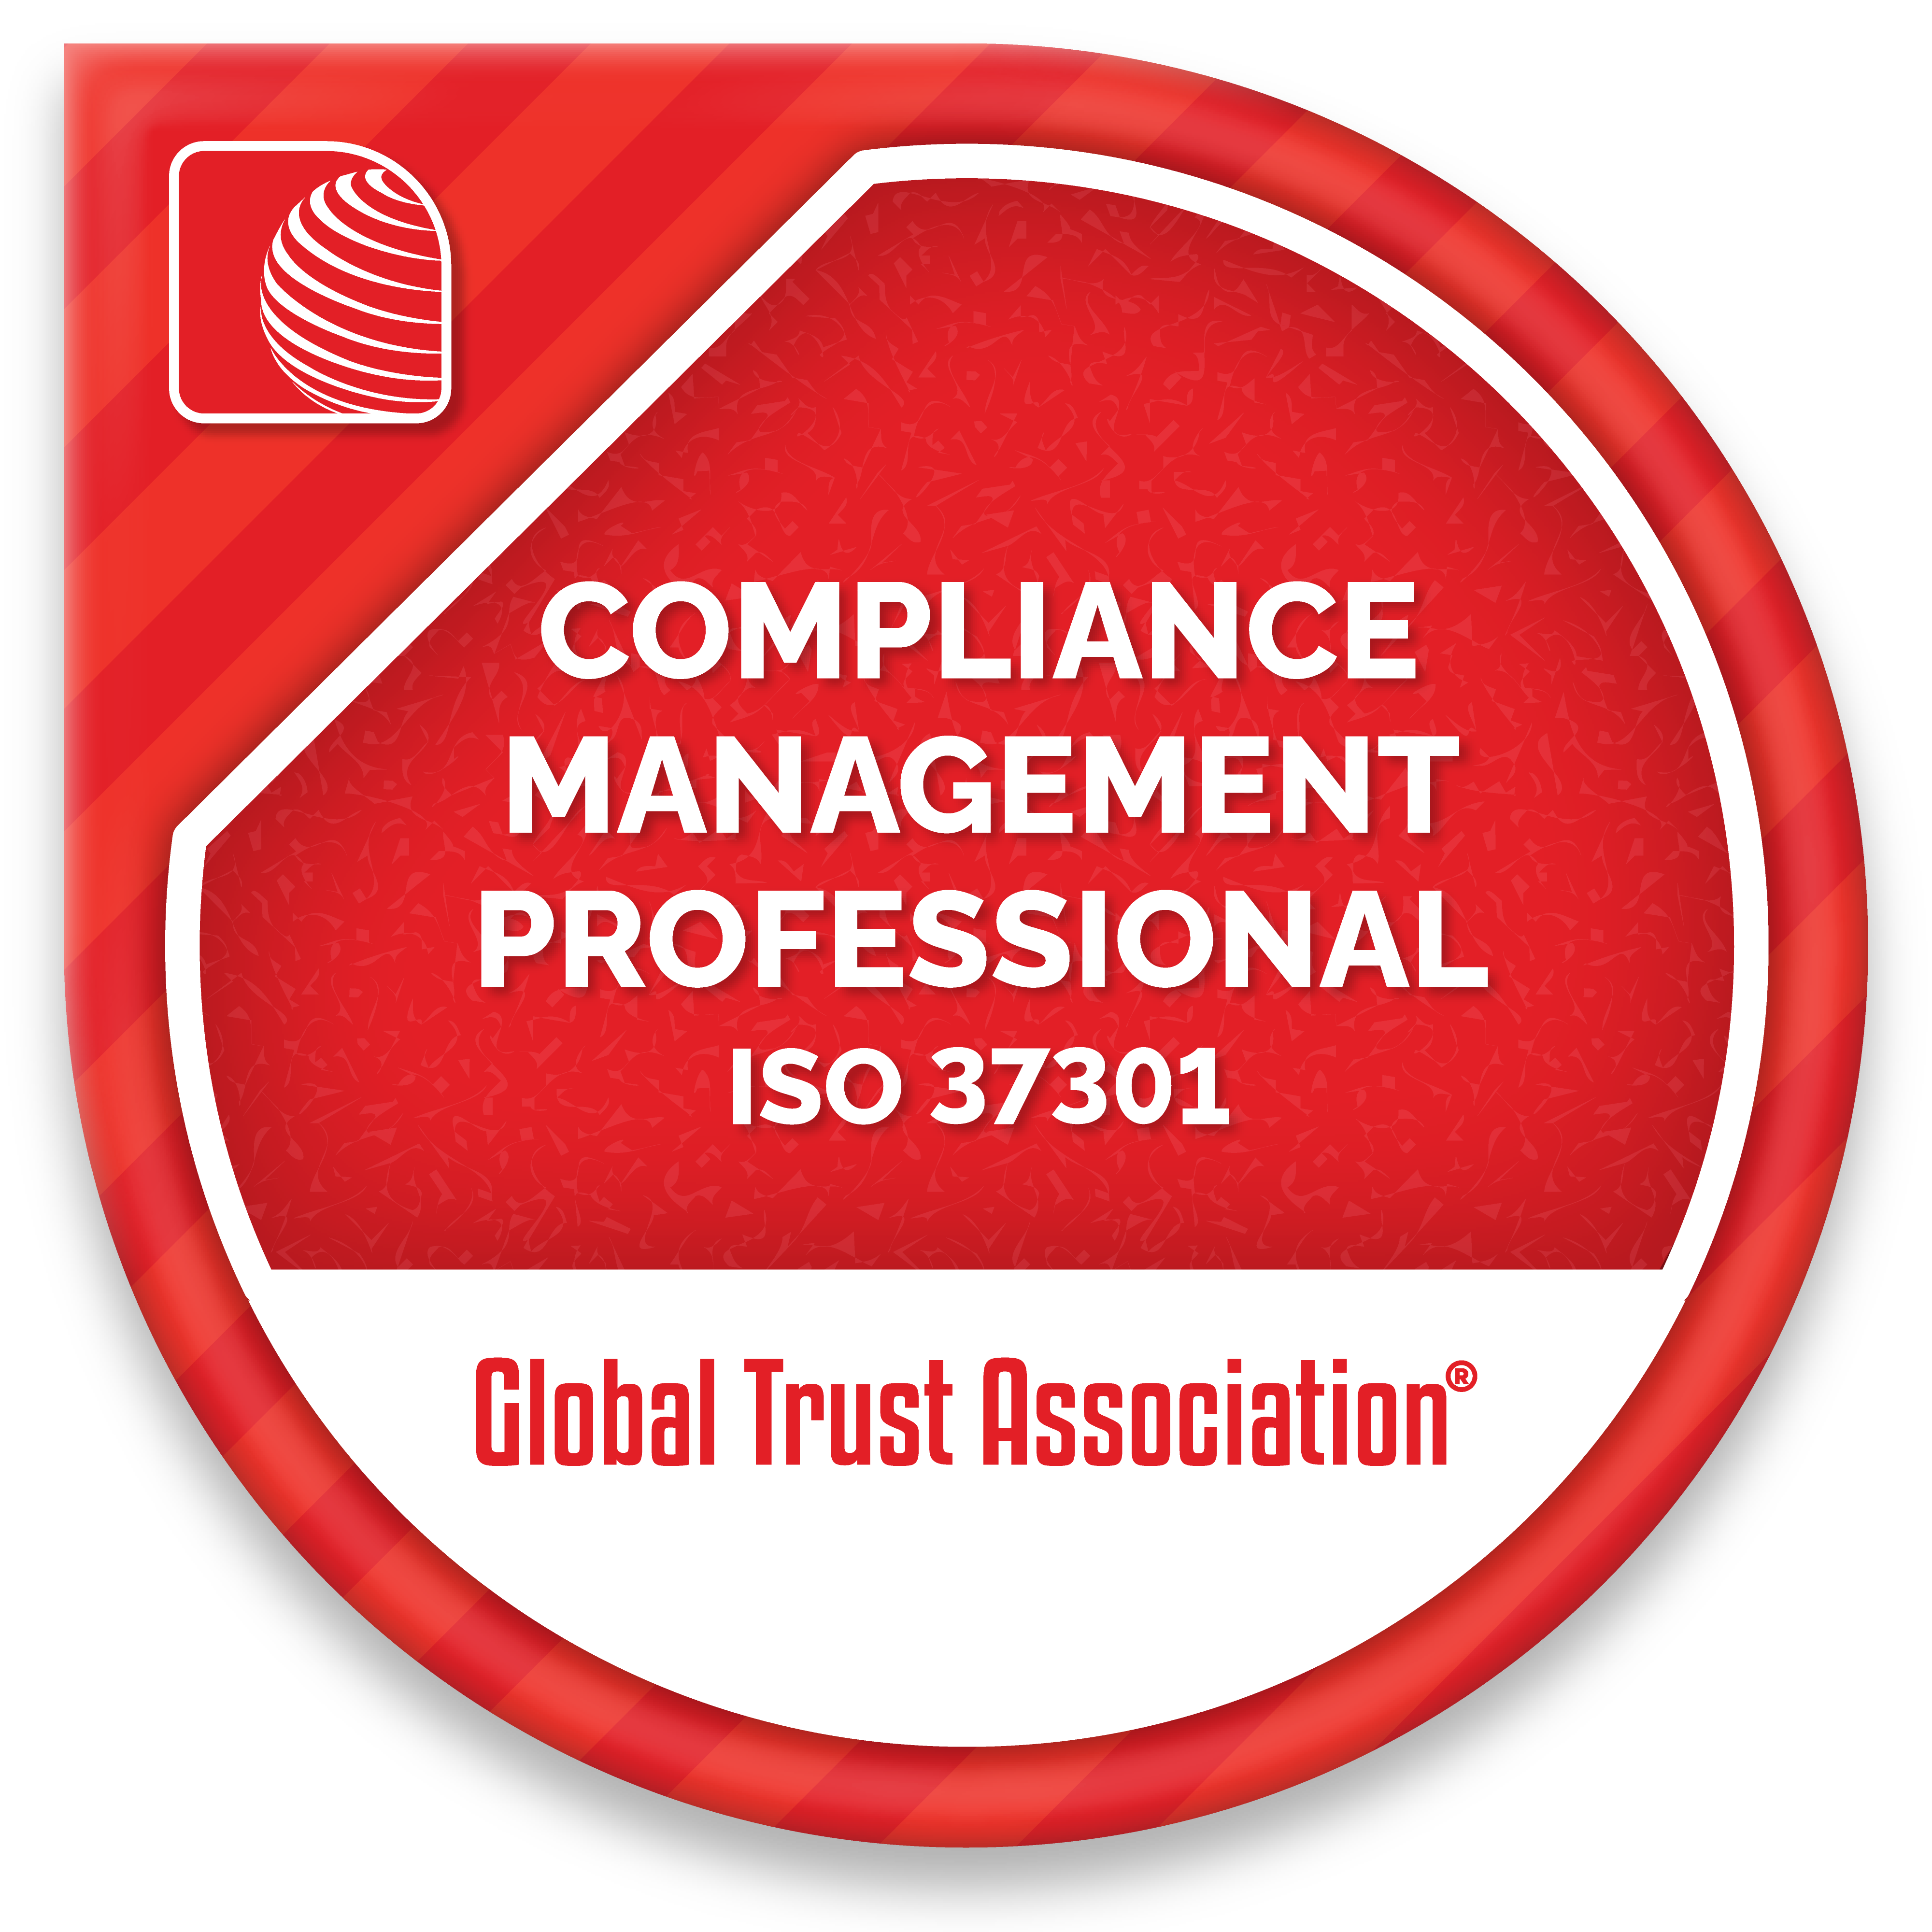 Certified Compliance Management Professional (ISO37301)